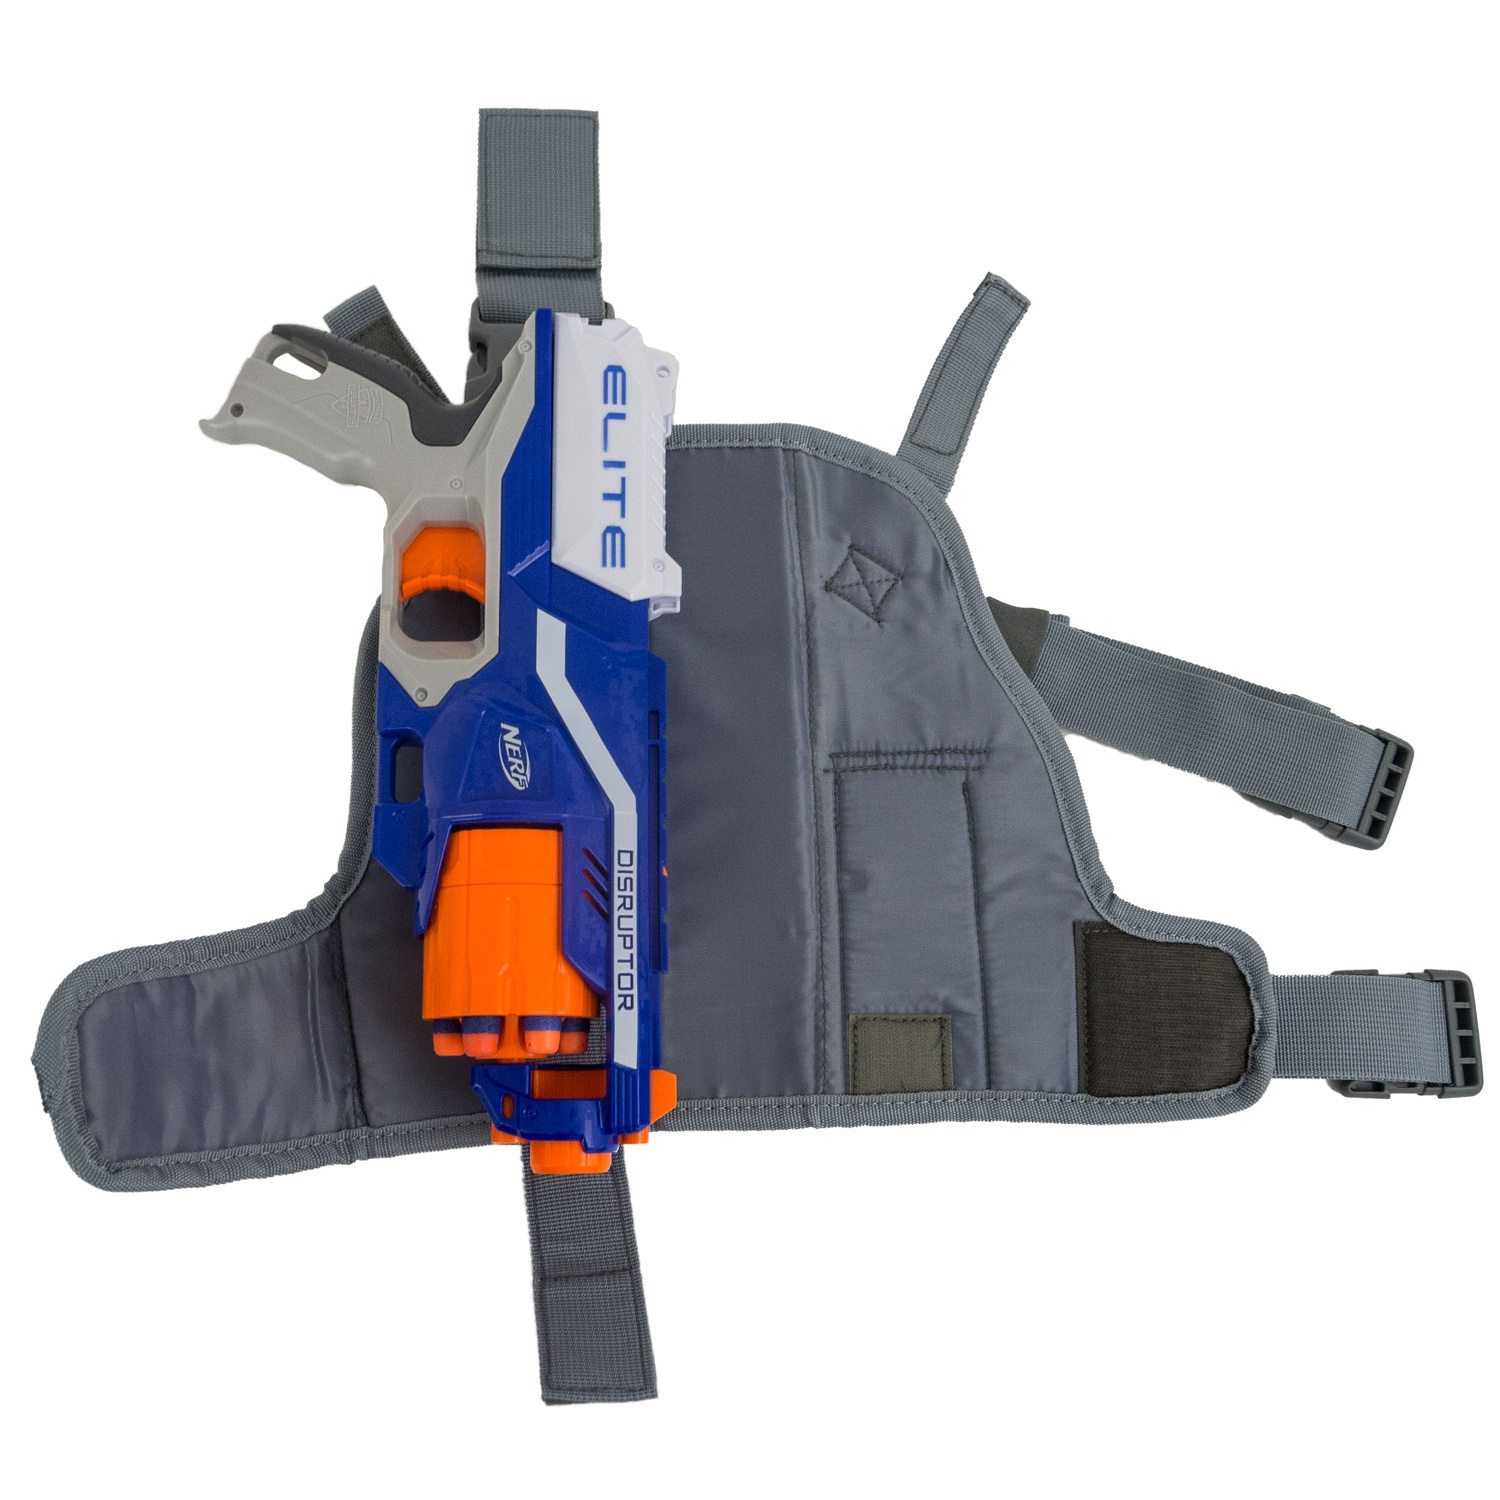 Undskyld mig Beskrivende Skifte tøj Blasterparts Multi Holster MX suitable for Nerf Blasters – Containment Crew